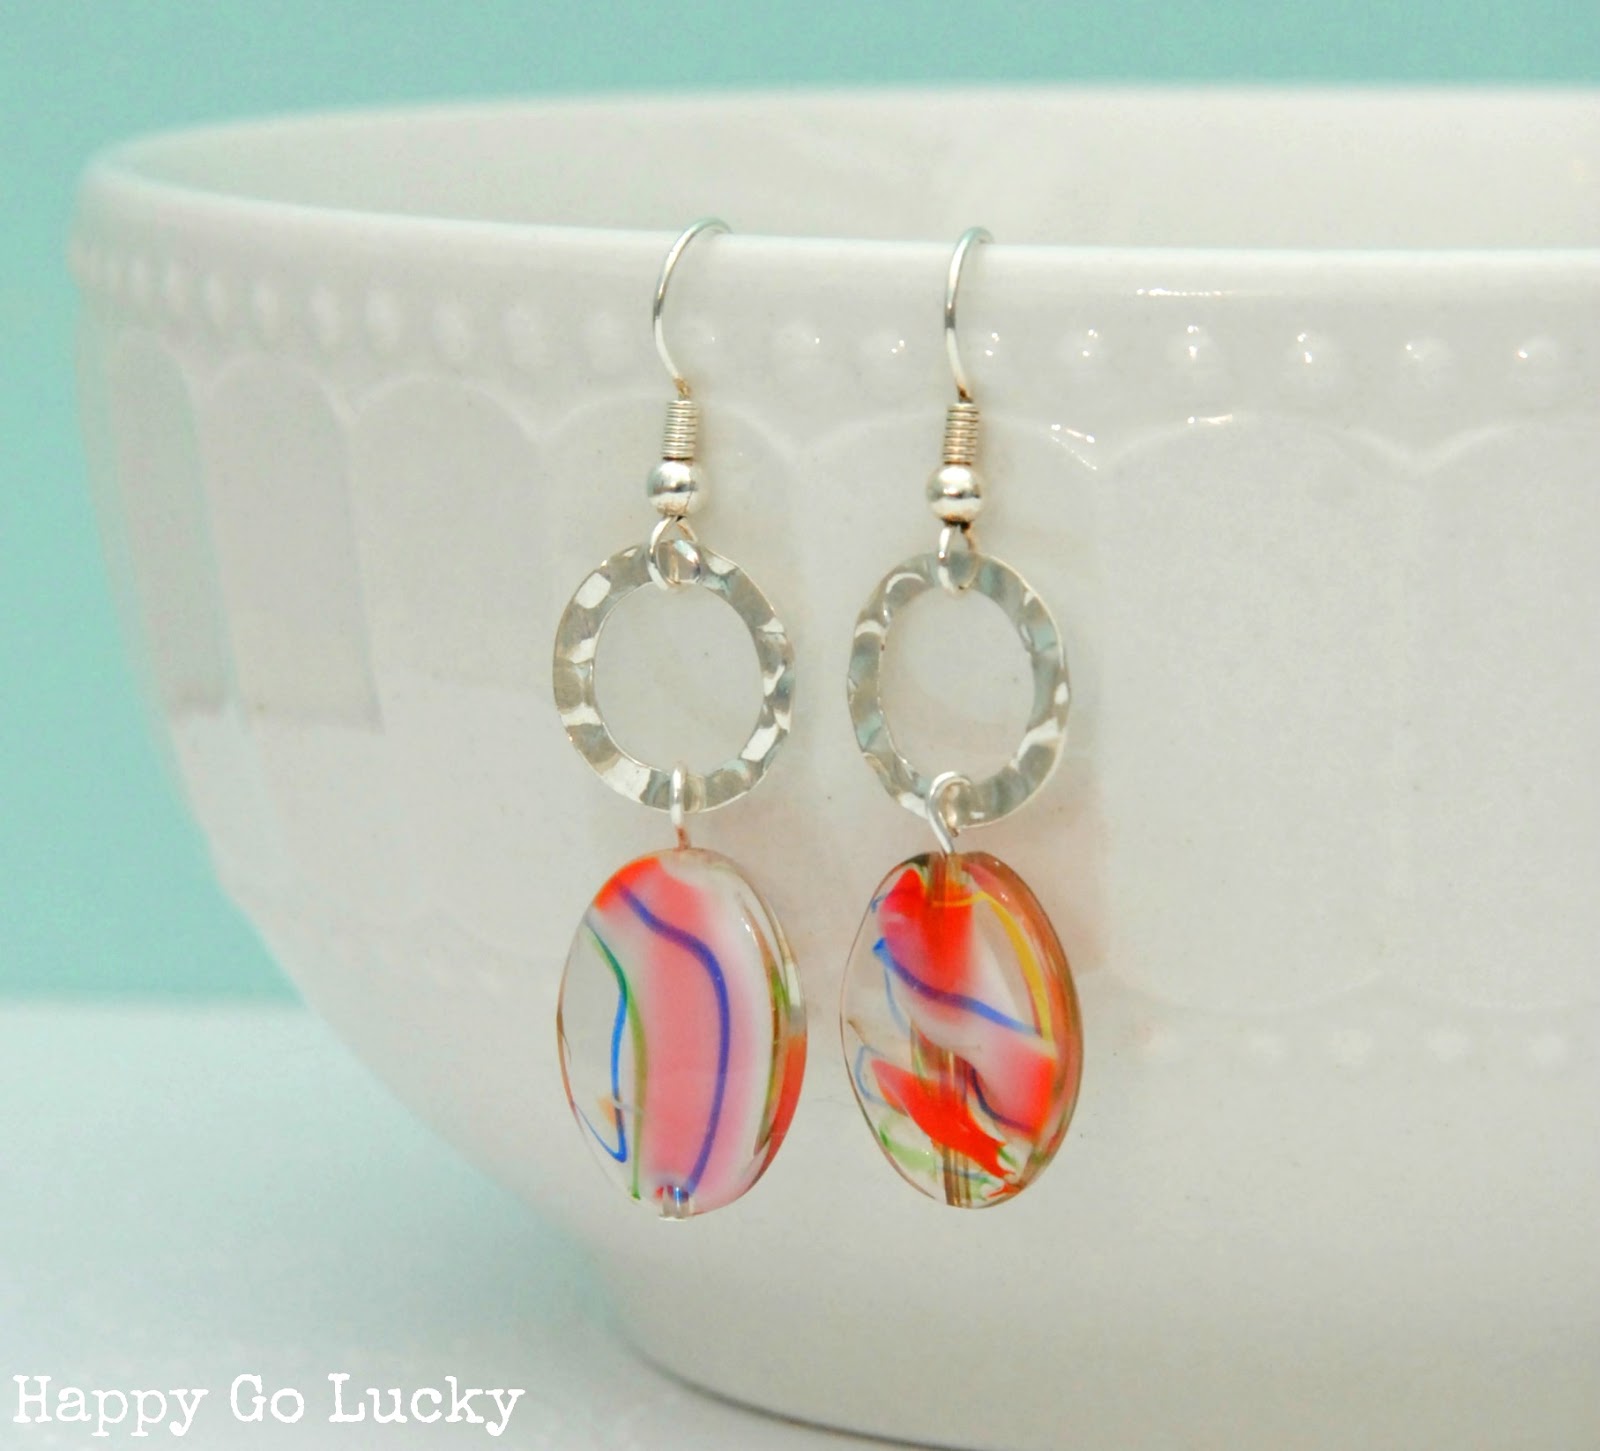 How To Make Easy Earring Cards For Packaging Your Handmade Earrings - A  Crafty Concept